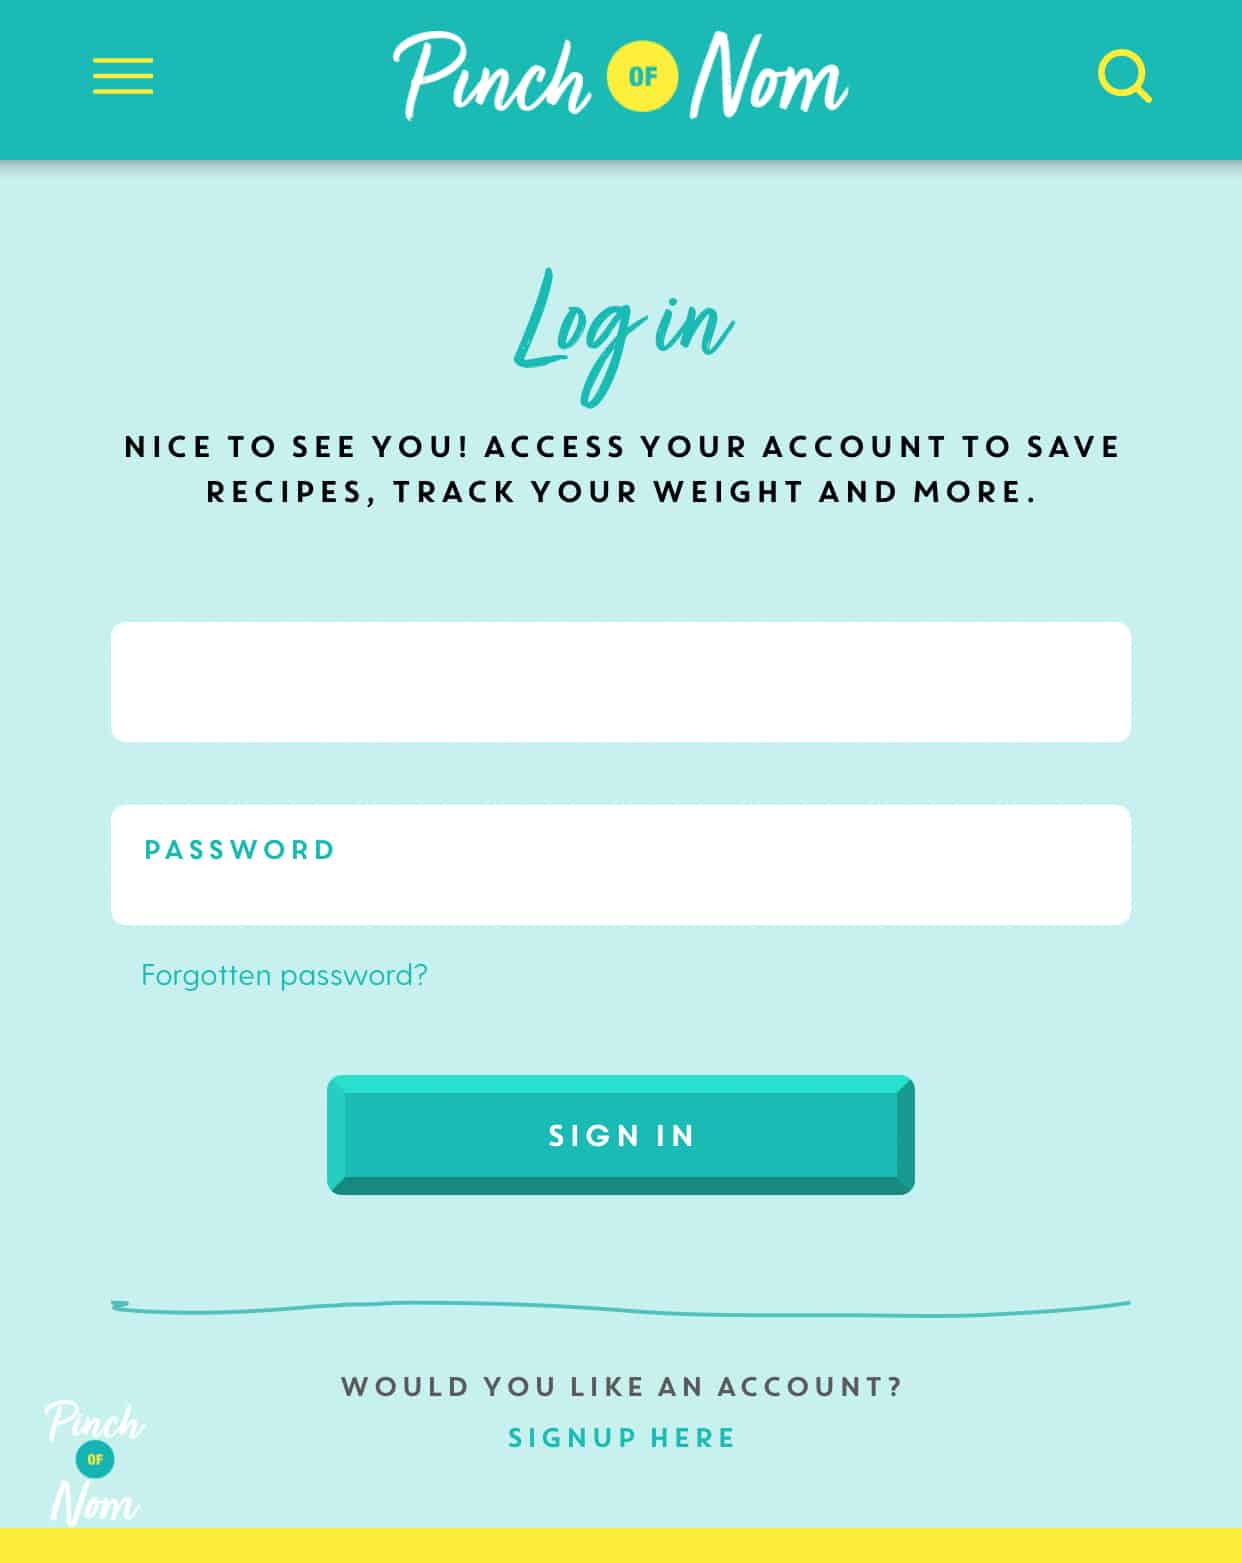 How to sign up and in to the website - Pinch of Nom